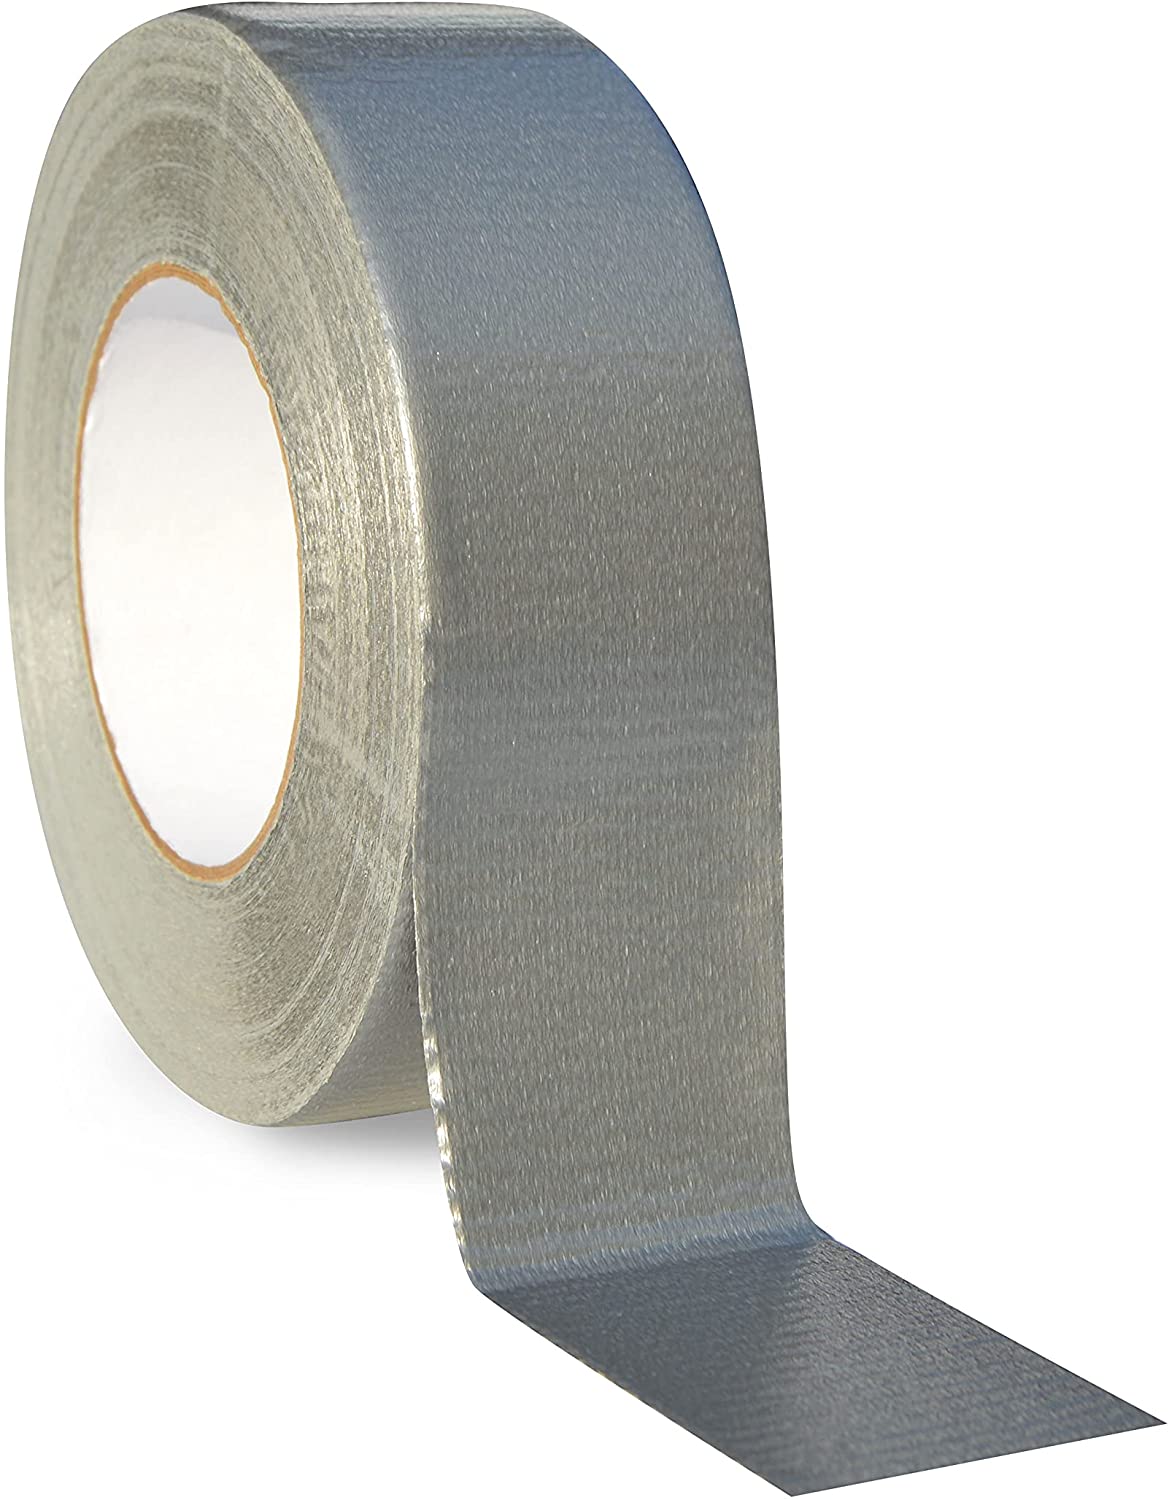 Utility Grade Silver Duct Tape 2 x 60 Yards 8 Mil Waterproof Tapes 48 Rolls